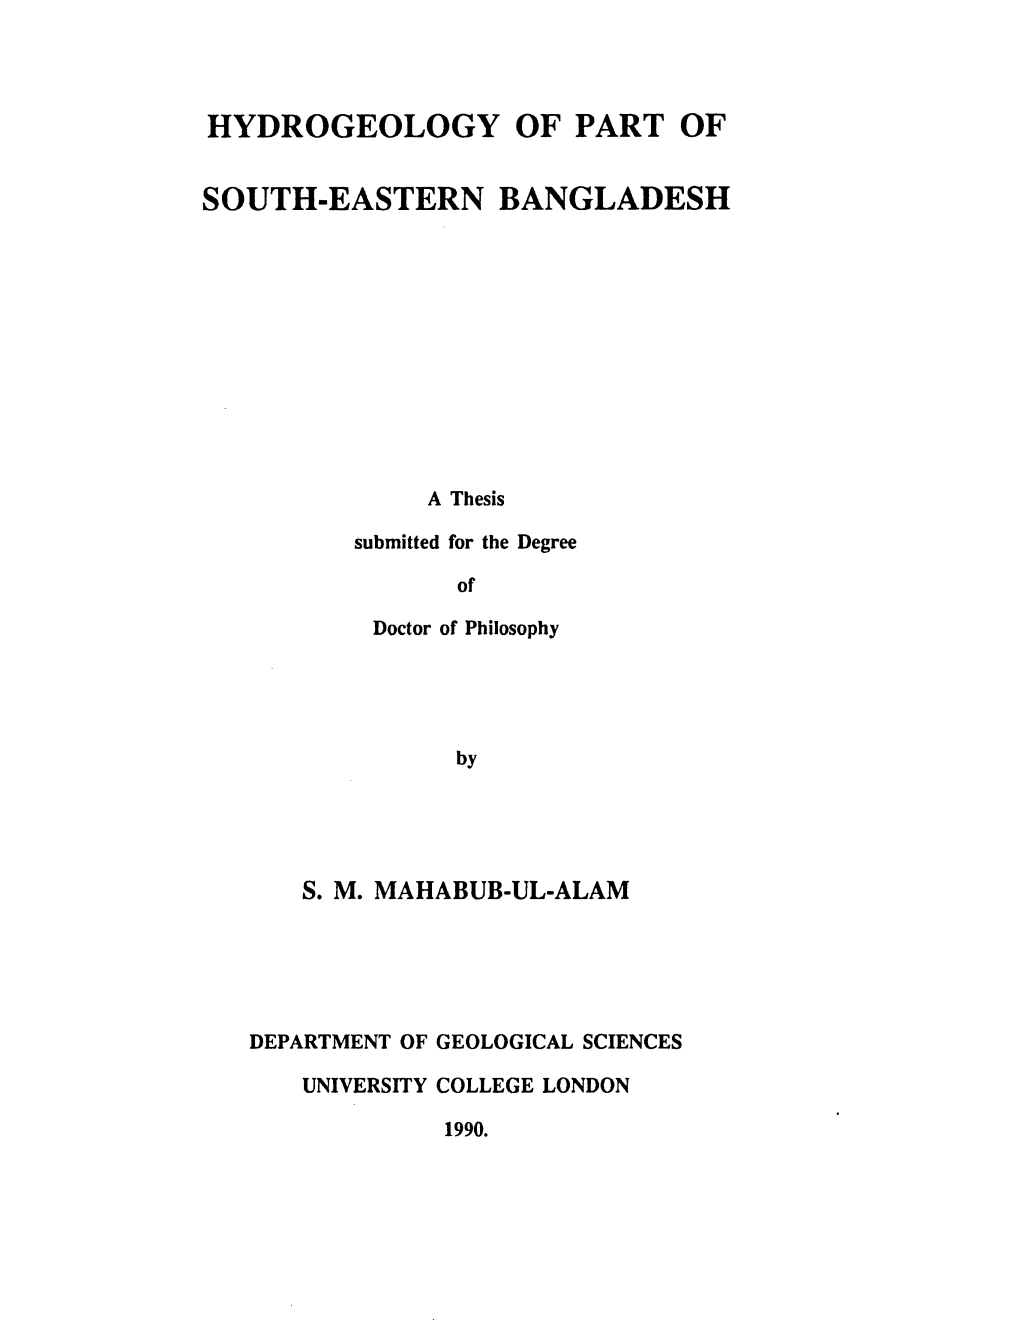 Hydrogeology of Part of South-Eastern Bangladesh